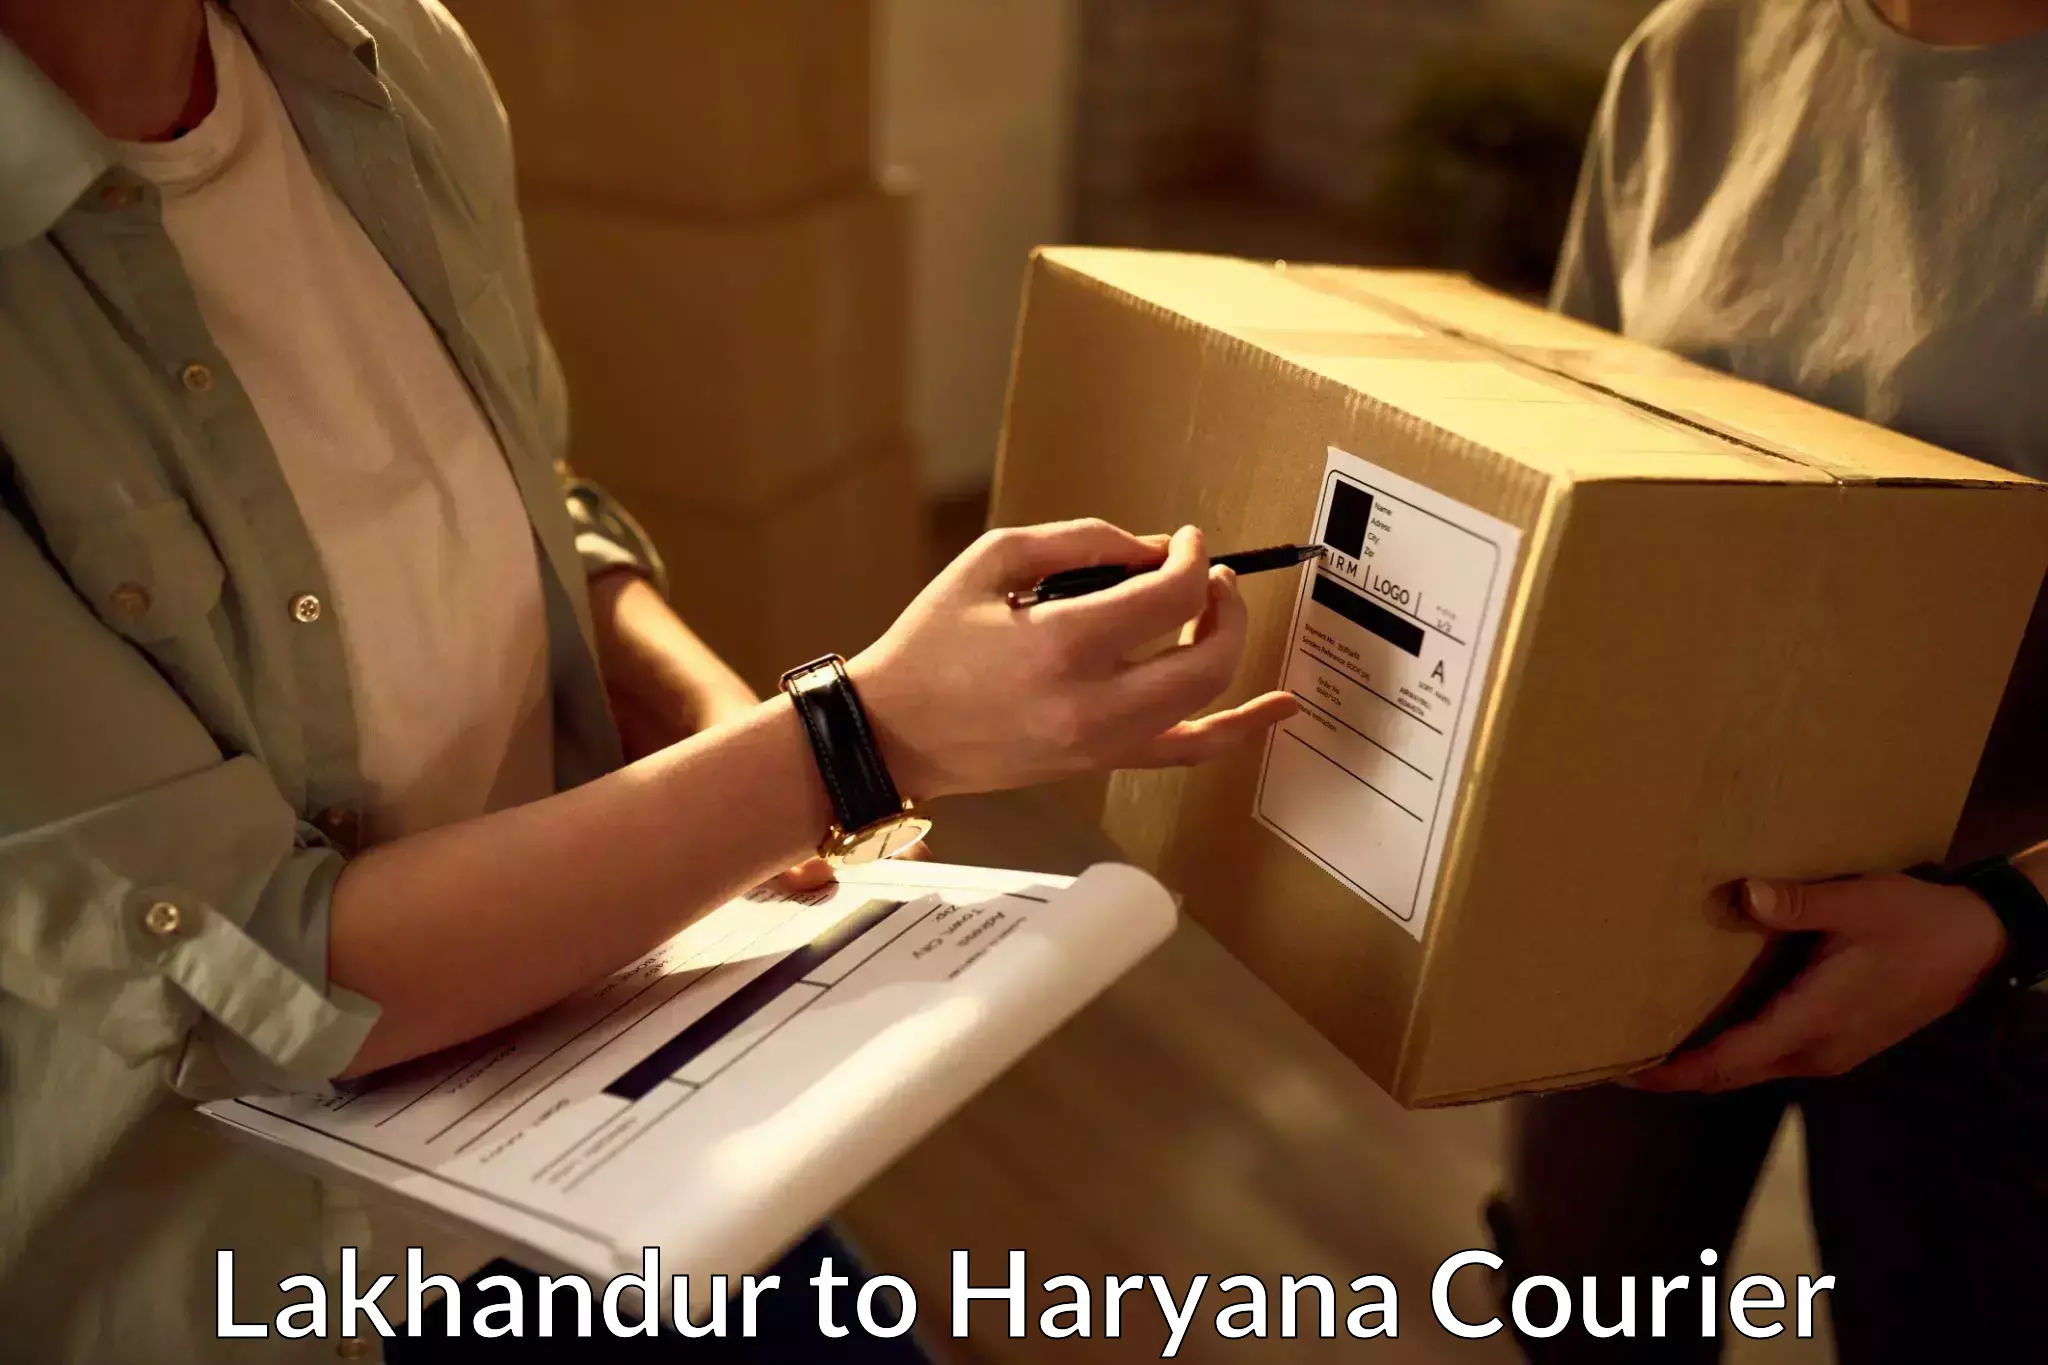 Same-day delivery solutions Lakhandur to Chaudhary Charan Singh Haryana Agricultural University Hisar